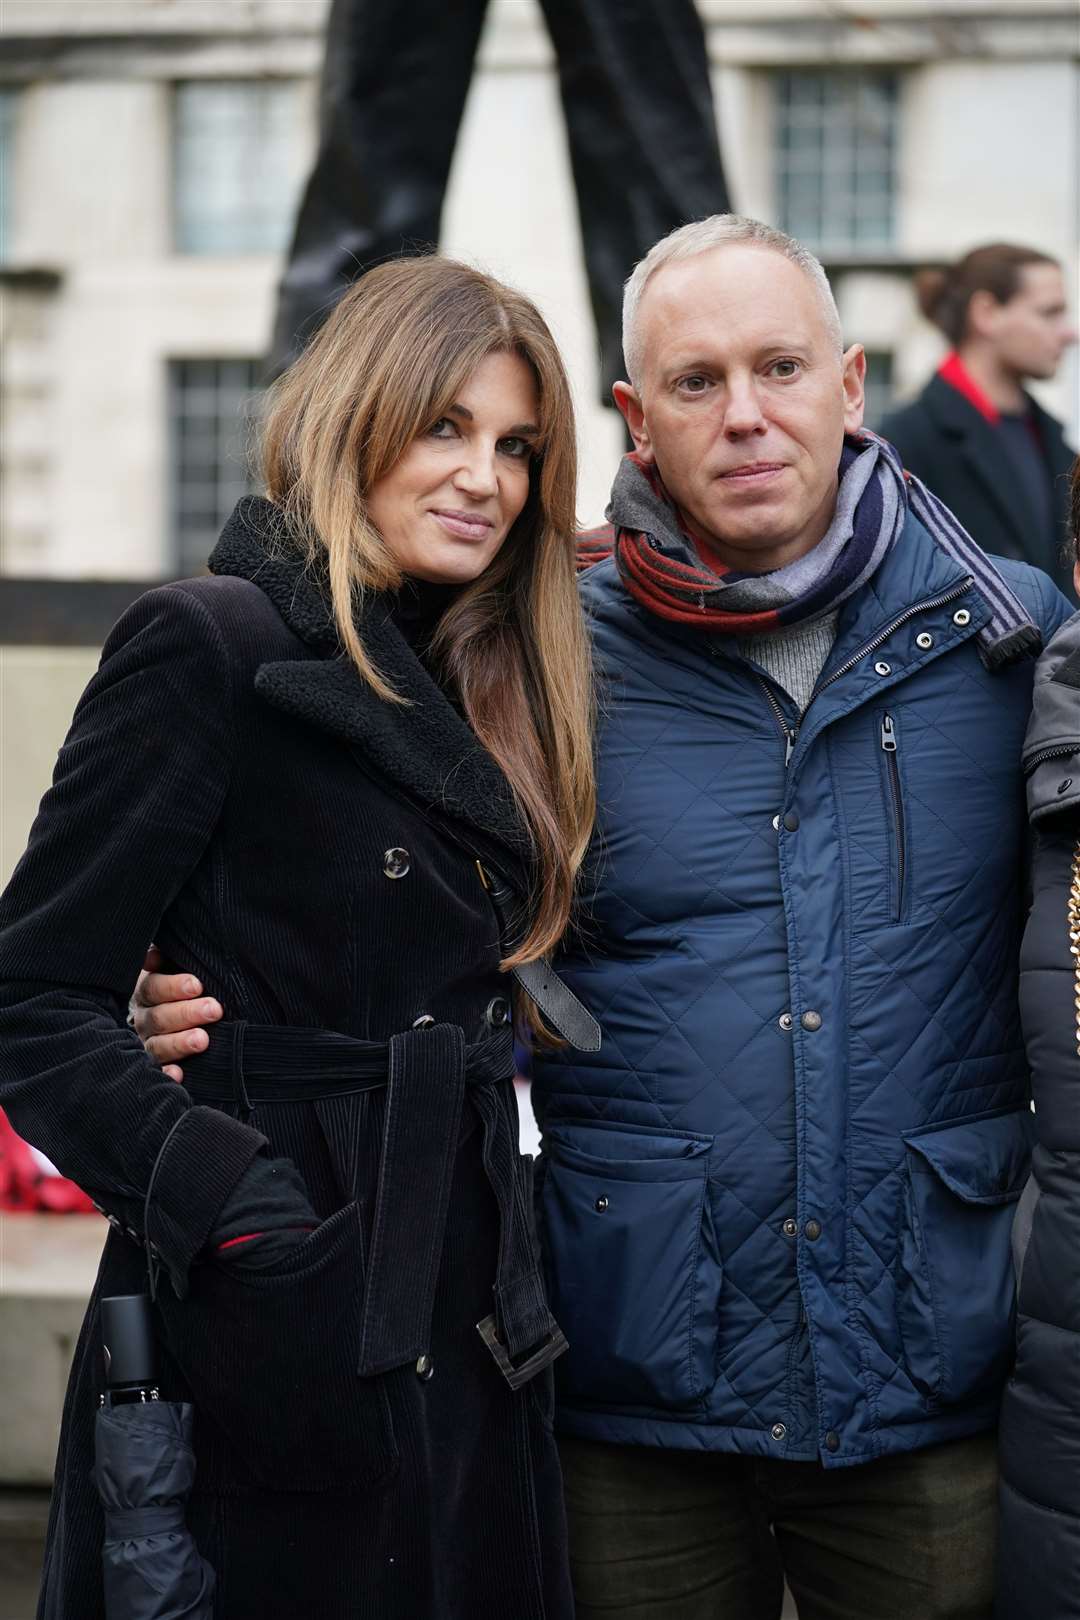 Jemima Goldsmith and Robert Rinder attended the event (Yui Mok/PA)